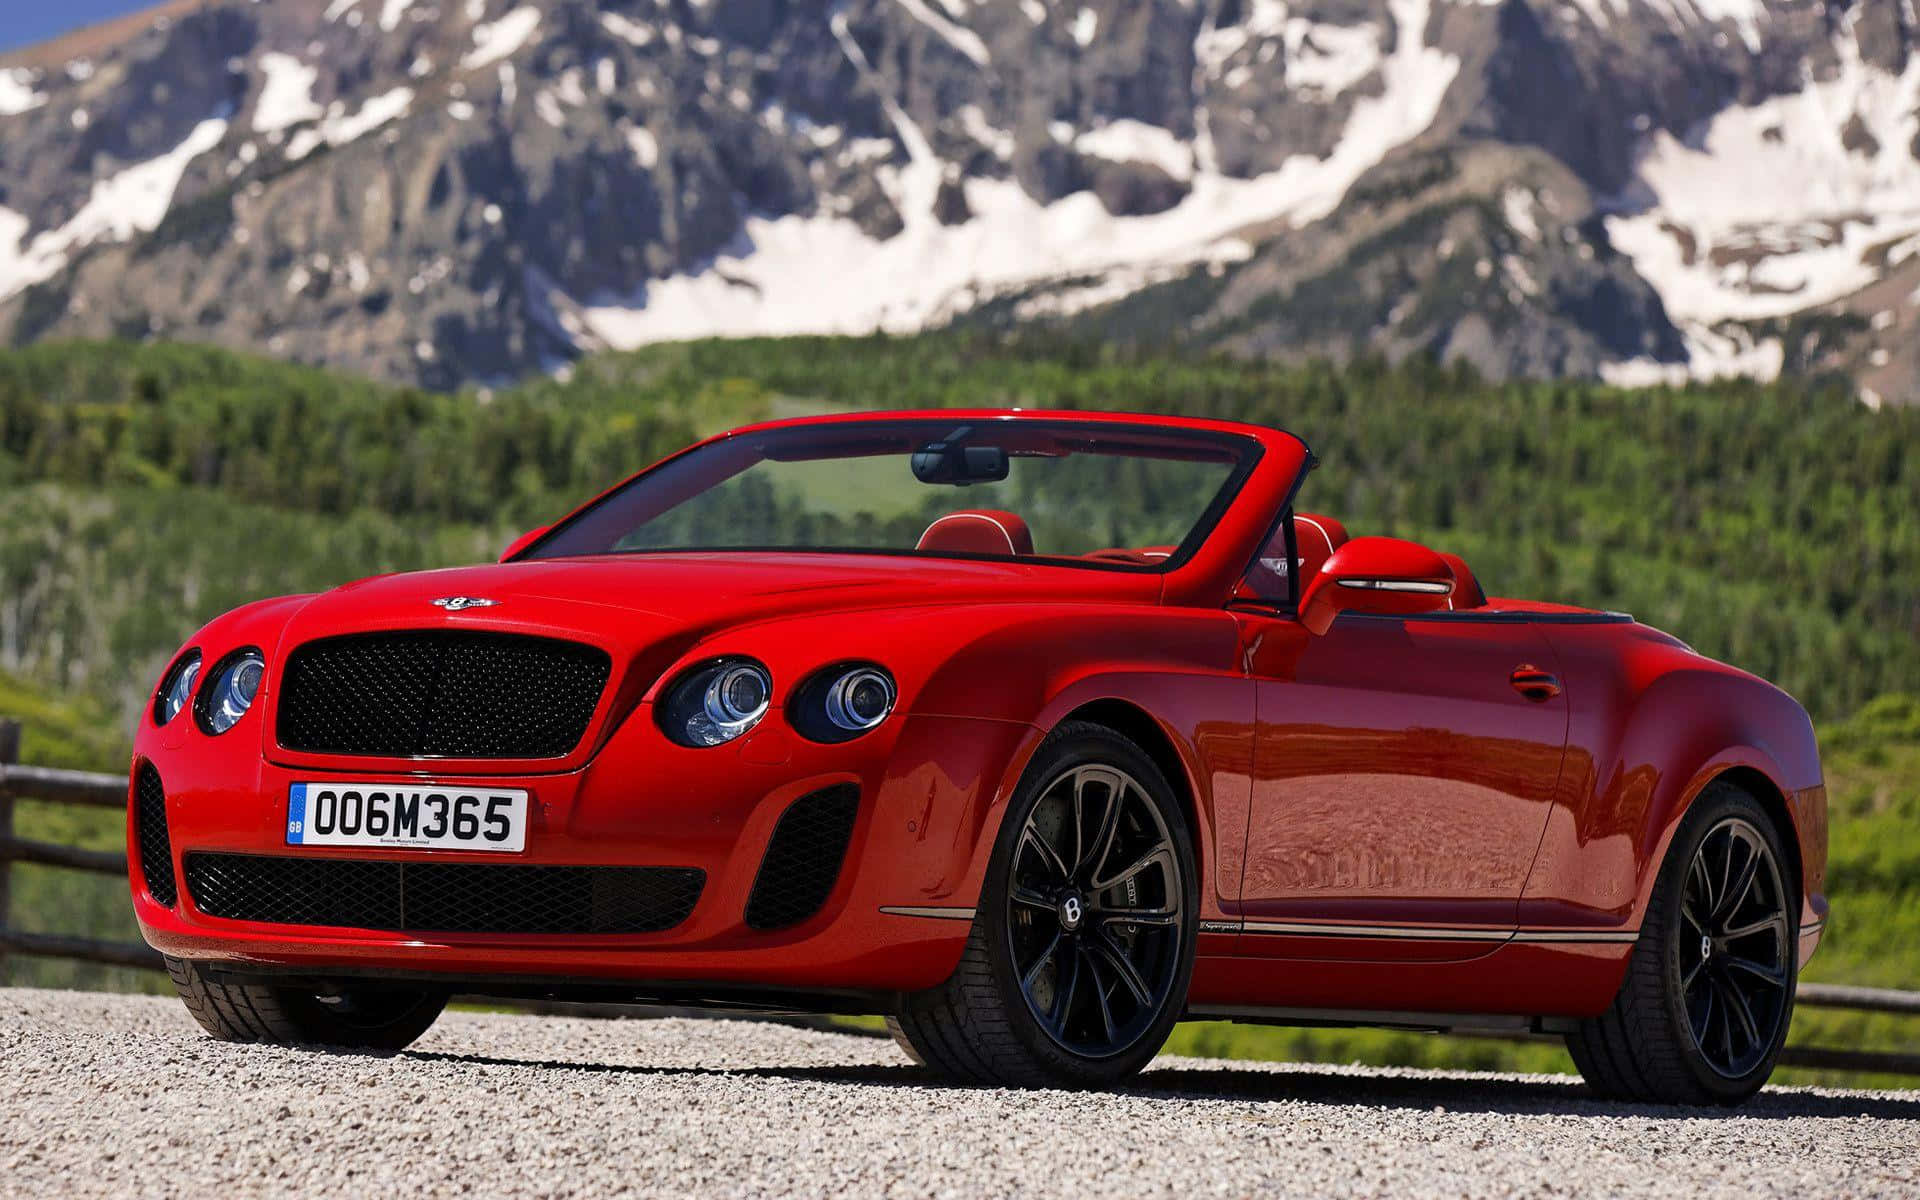 Drive with confidence in your luxury Bentley Sport. Wallpaper